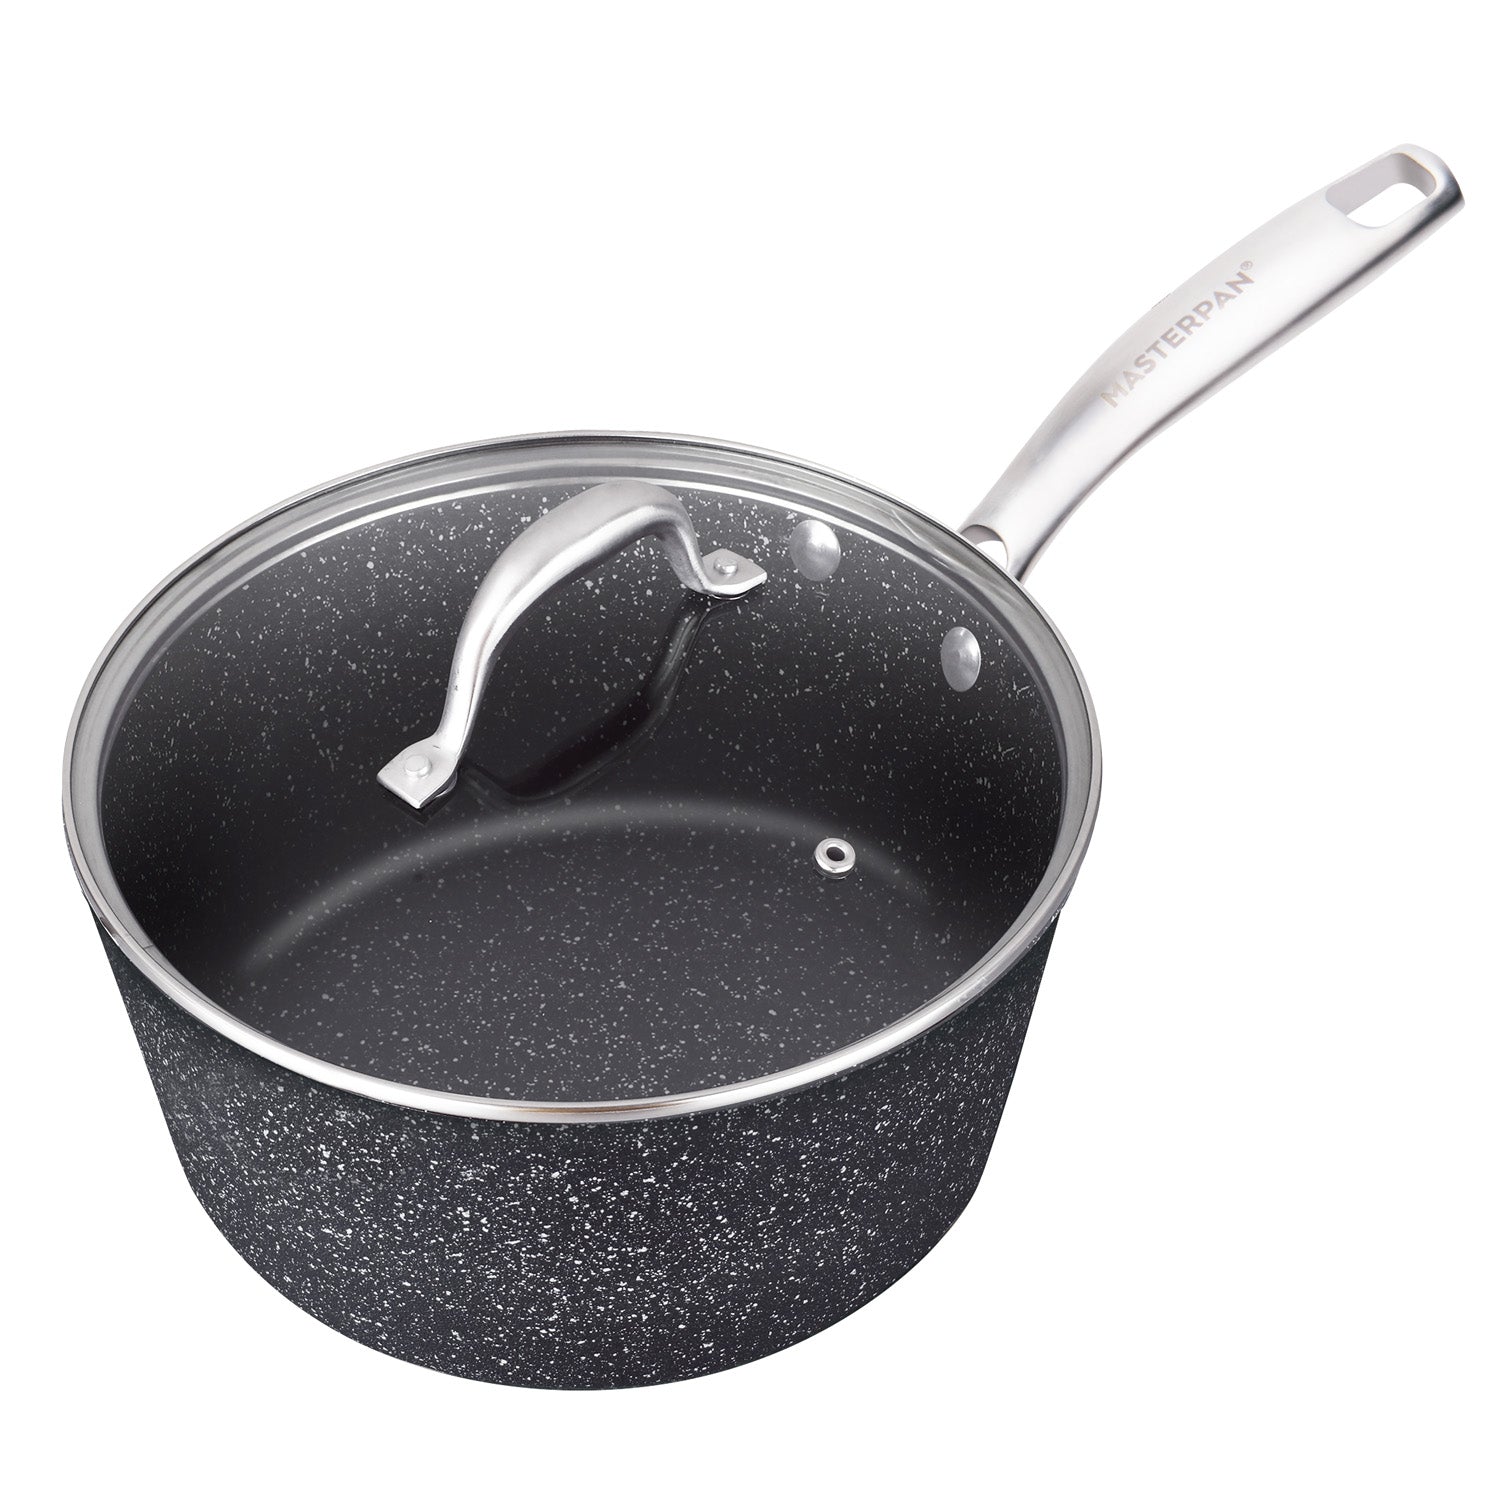 Crepe Pan, Handle Non-stick Pot Fits Stainless Steel Silvery Pan